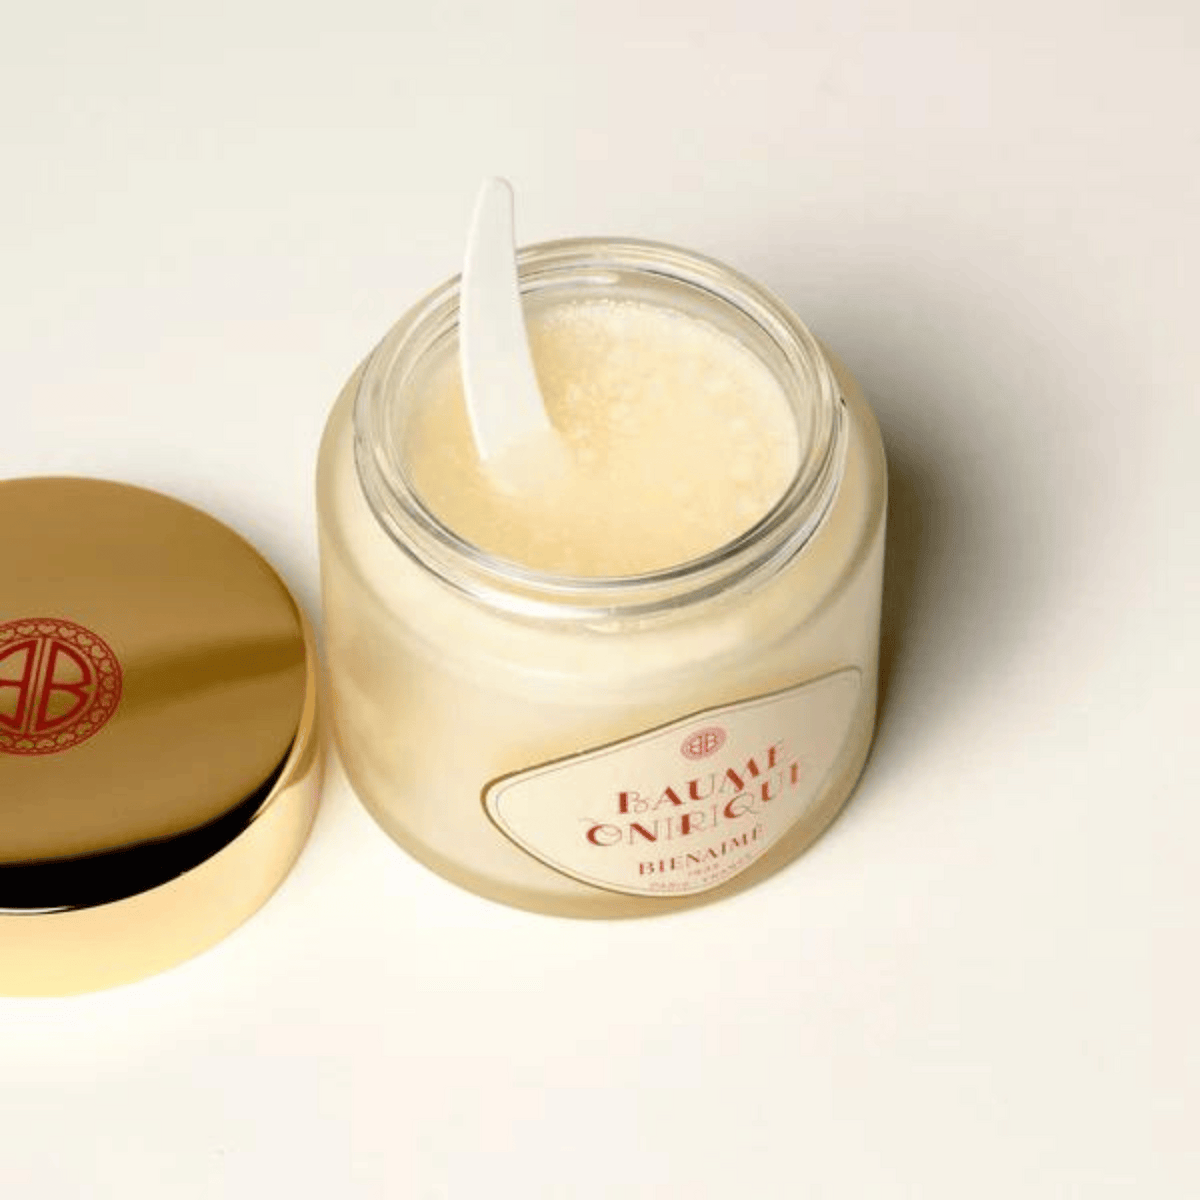 Alternate Image of Body Balm - Jours Heureux